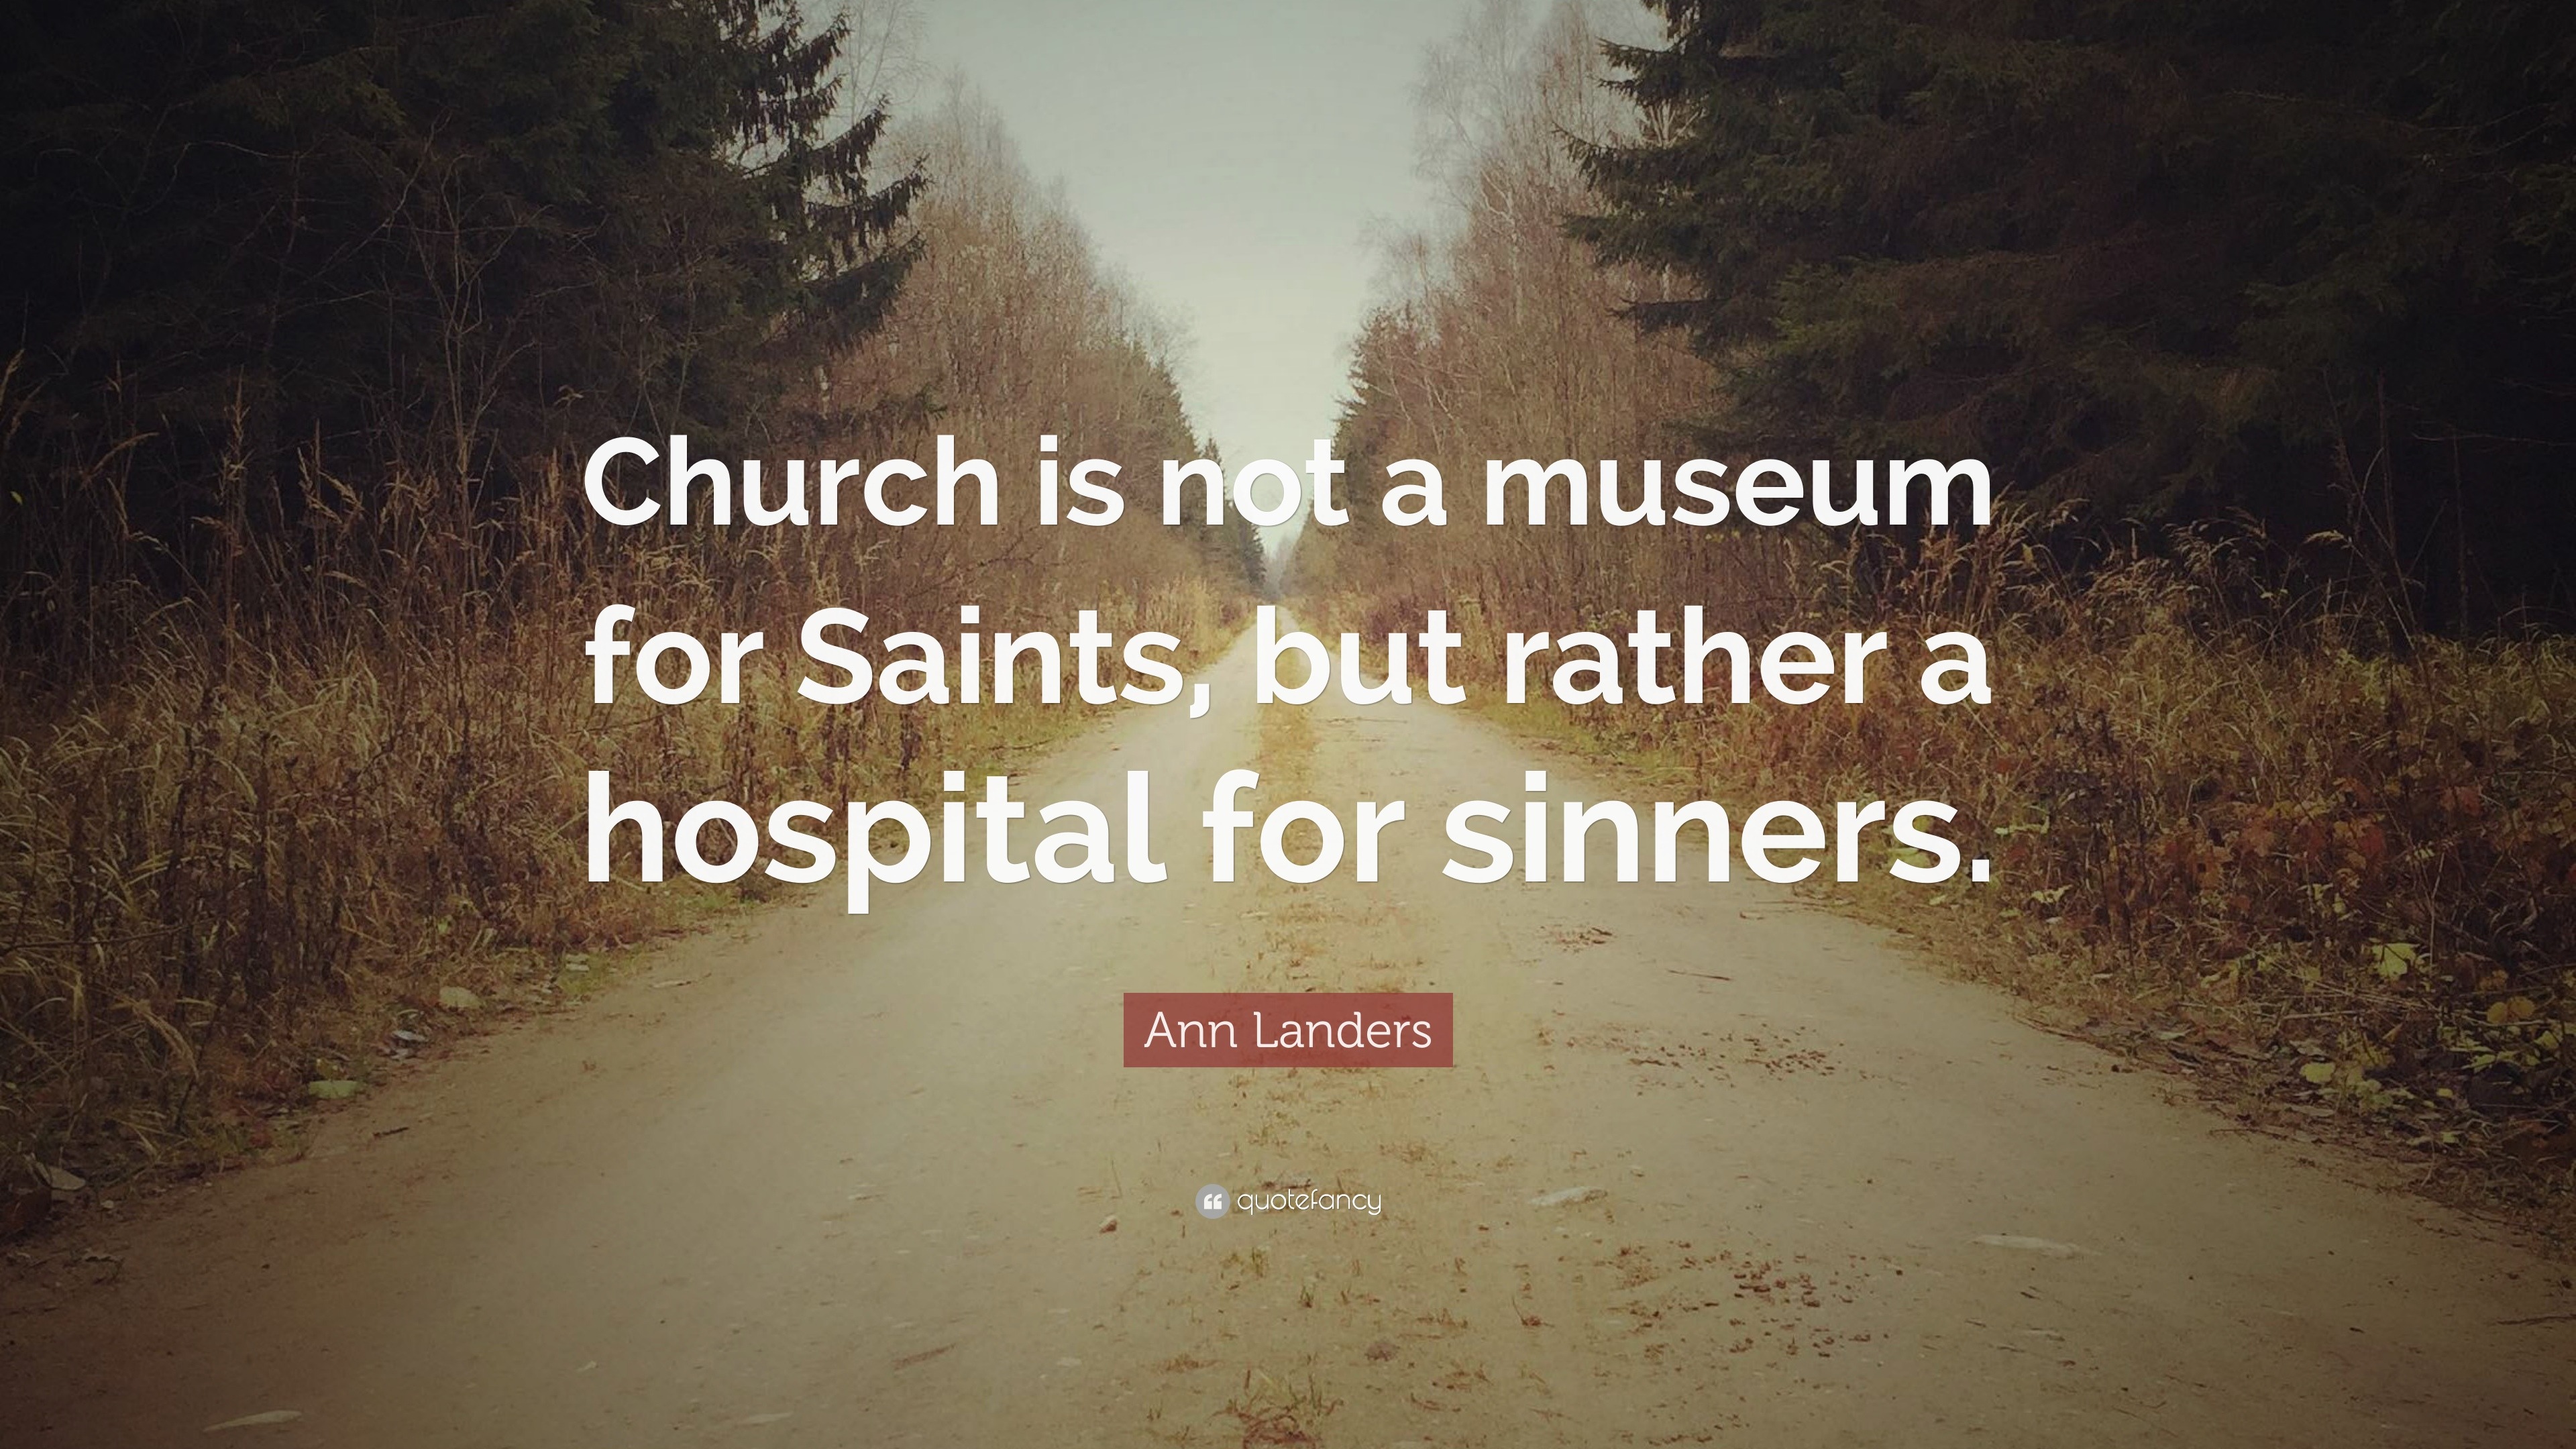 Ann Landers Quote: “Church is not a museum for Saints, but rather a hospital  for sinners.”